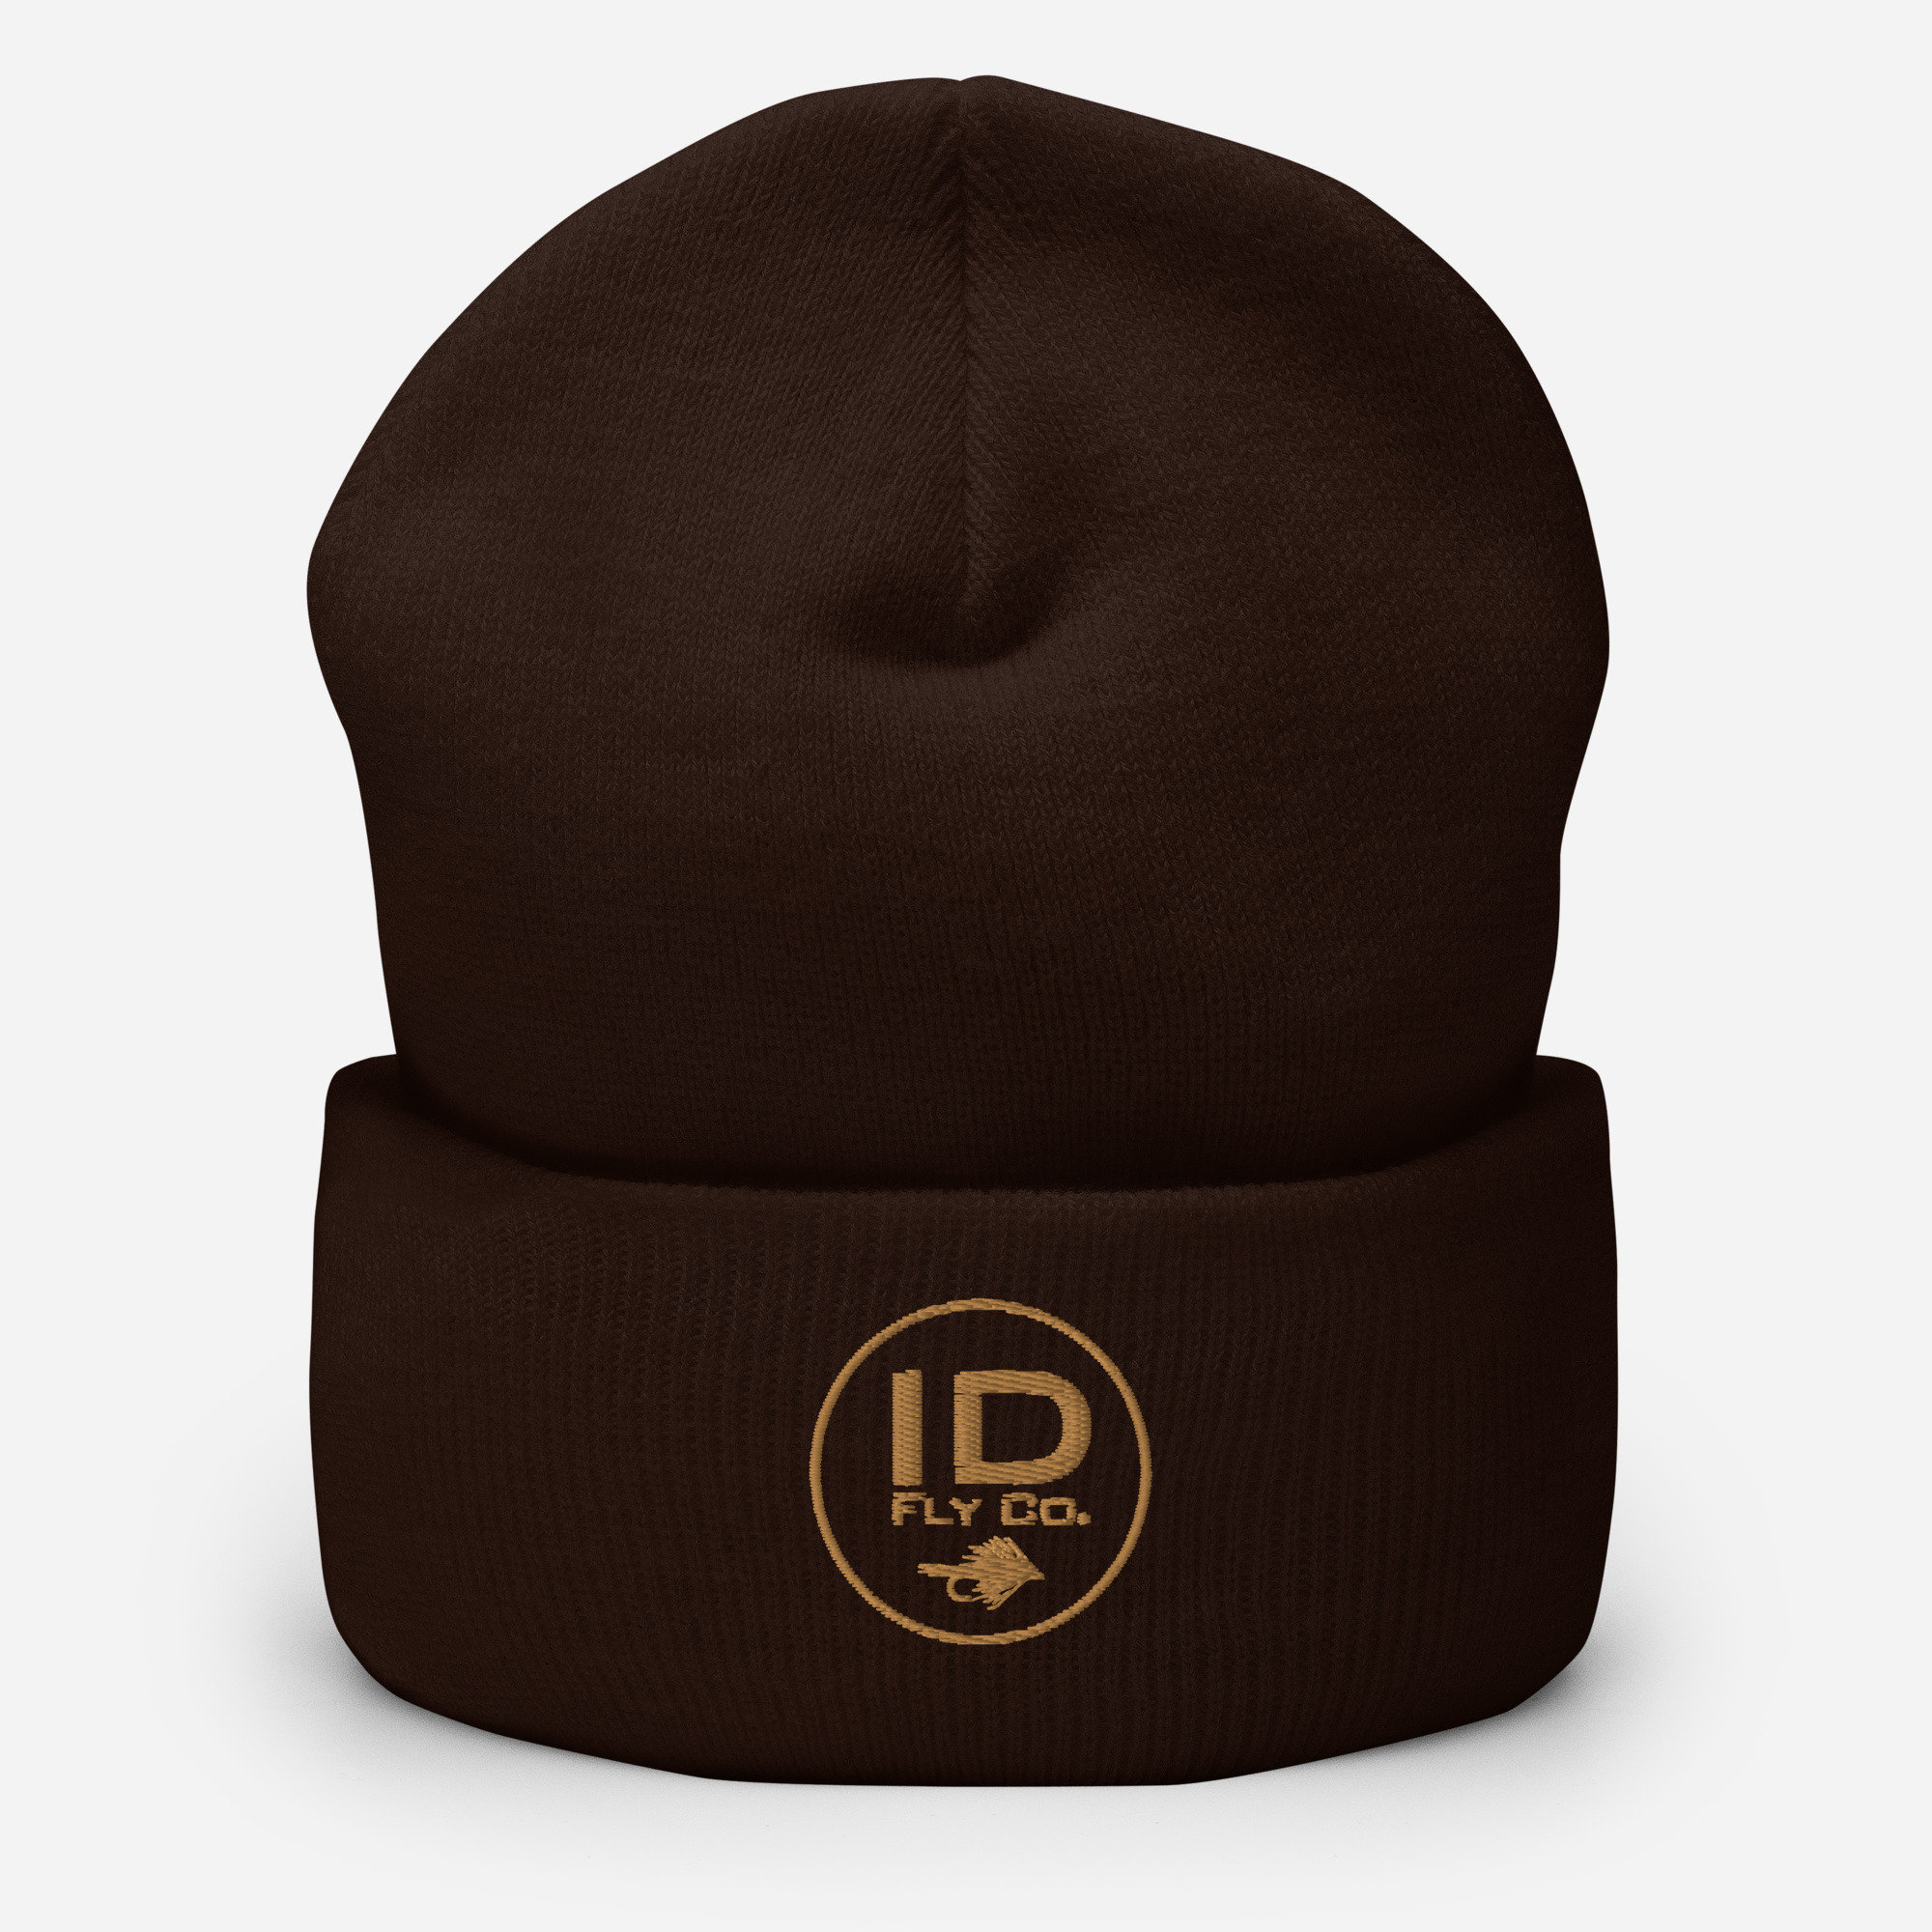 ID Fly Co Logo Embroidered Fly Fishing Beanie Winter Beanie